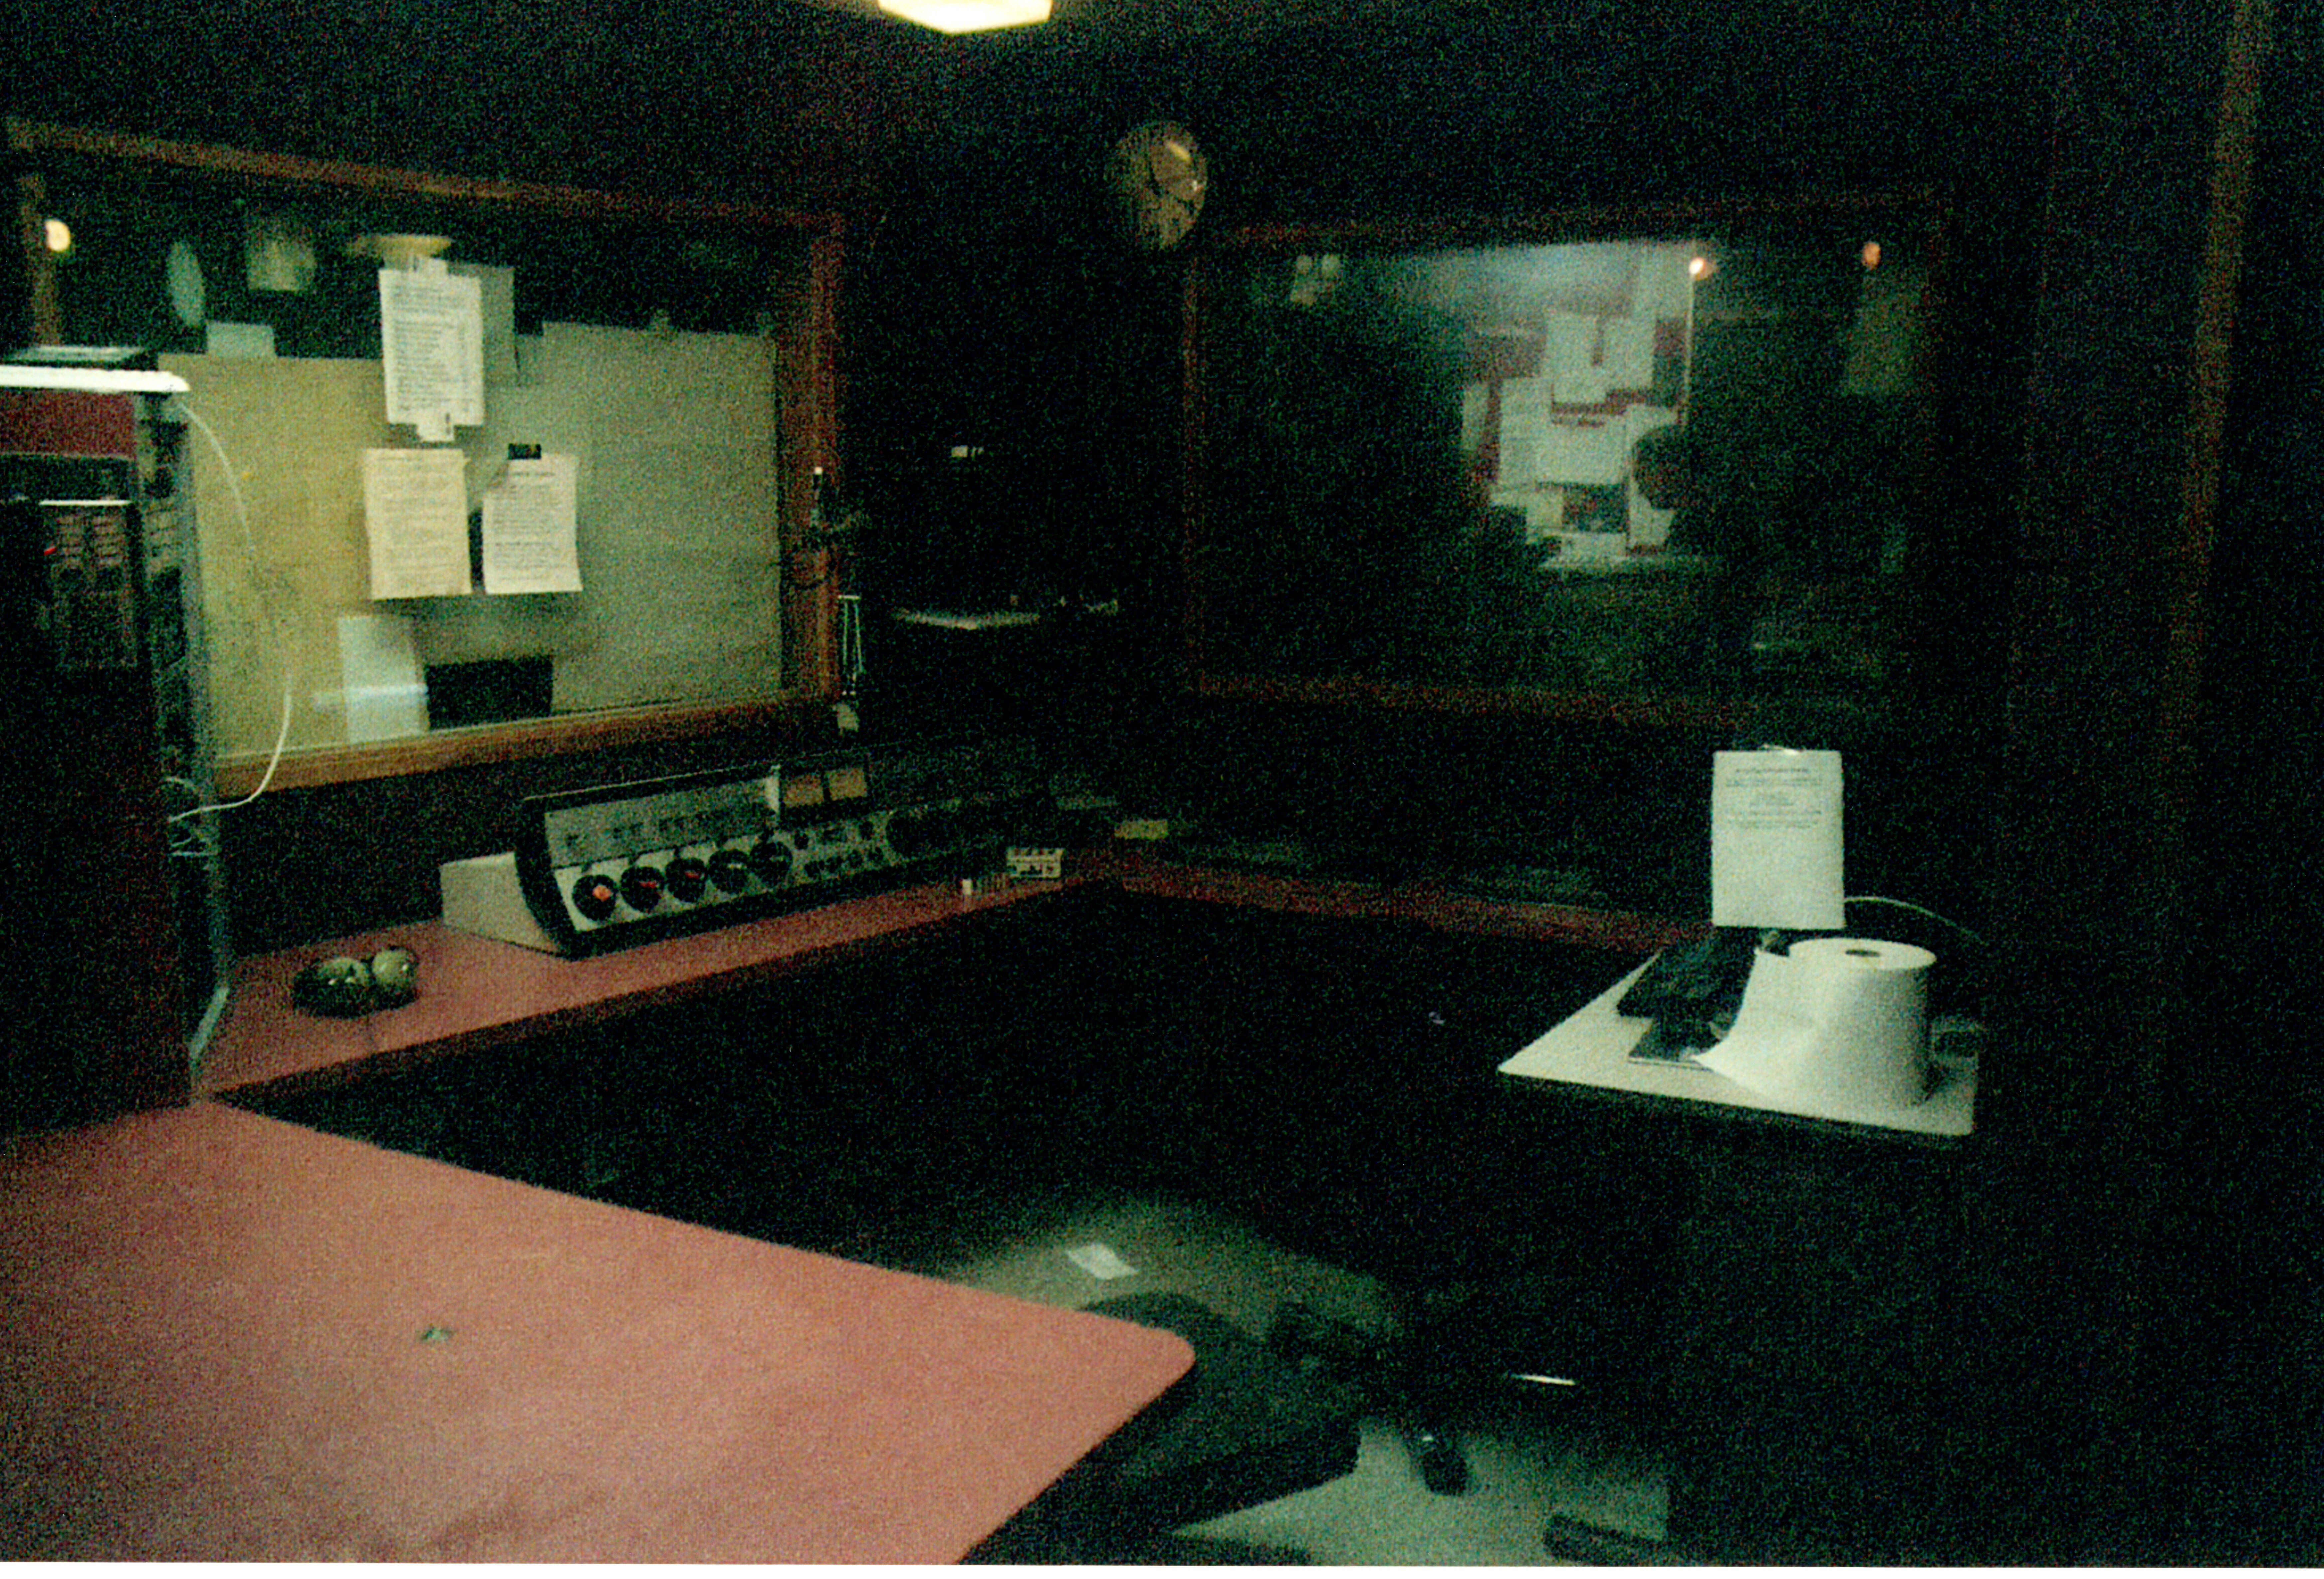 2004 - Production in the Dark